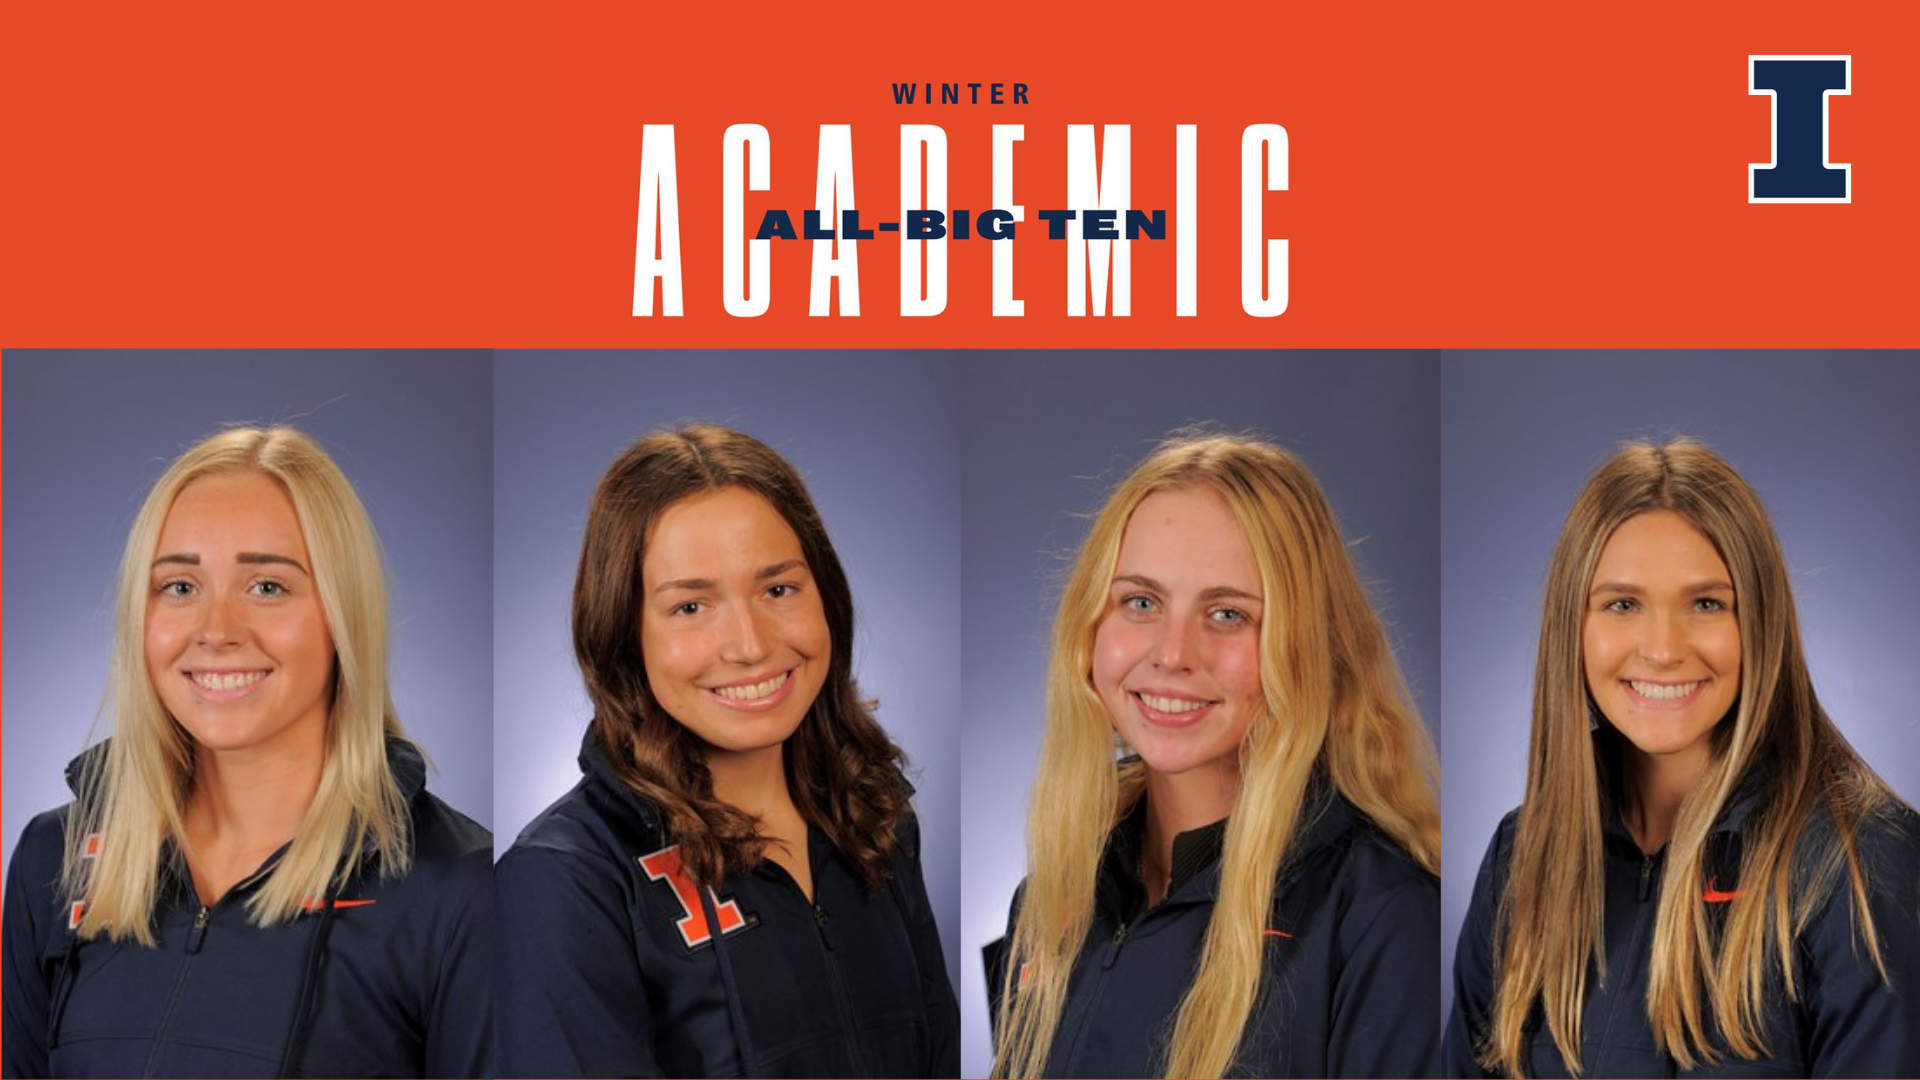 Top half of picture titled "Winter All-Big Ten Academic," with swim team roster headshots of Hannah Aegerter, Lia Munson, Meghan Niziolek, and Isabelle Packard in a row below.